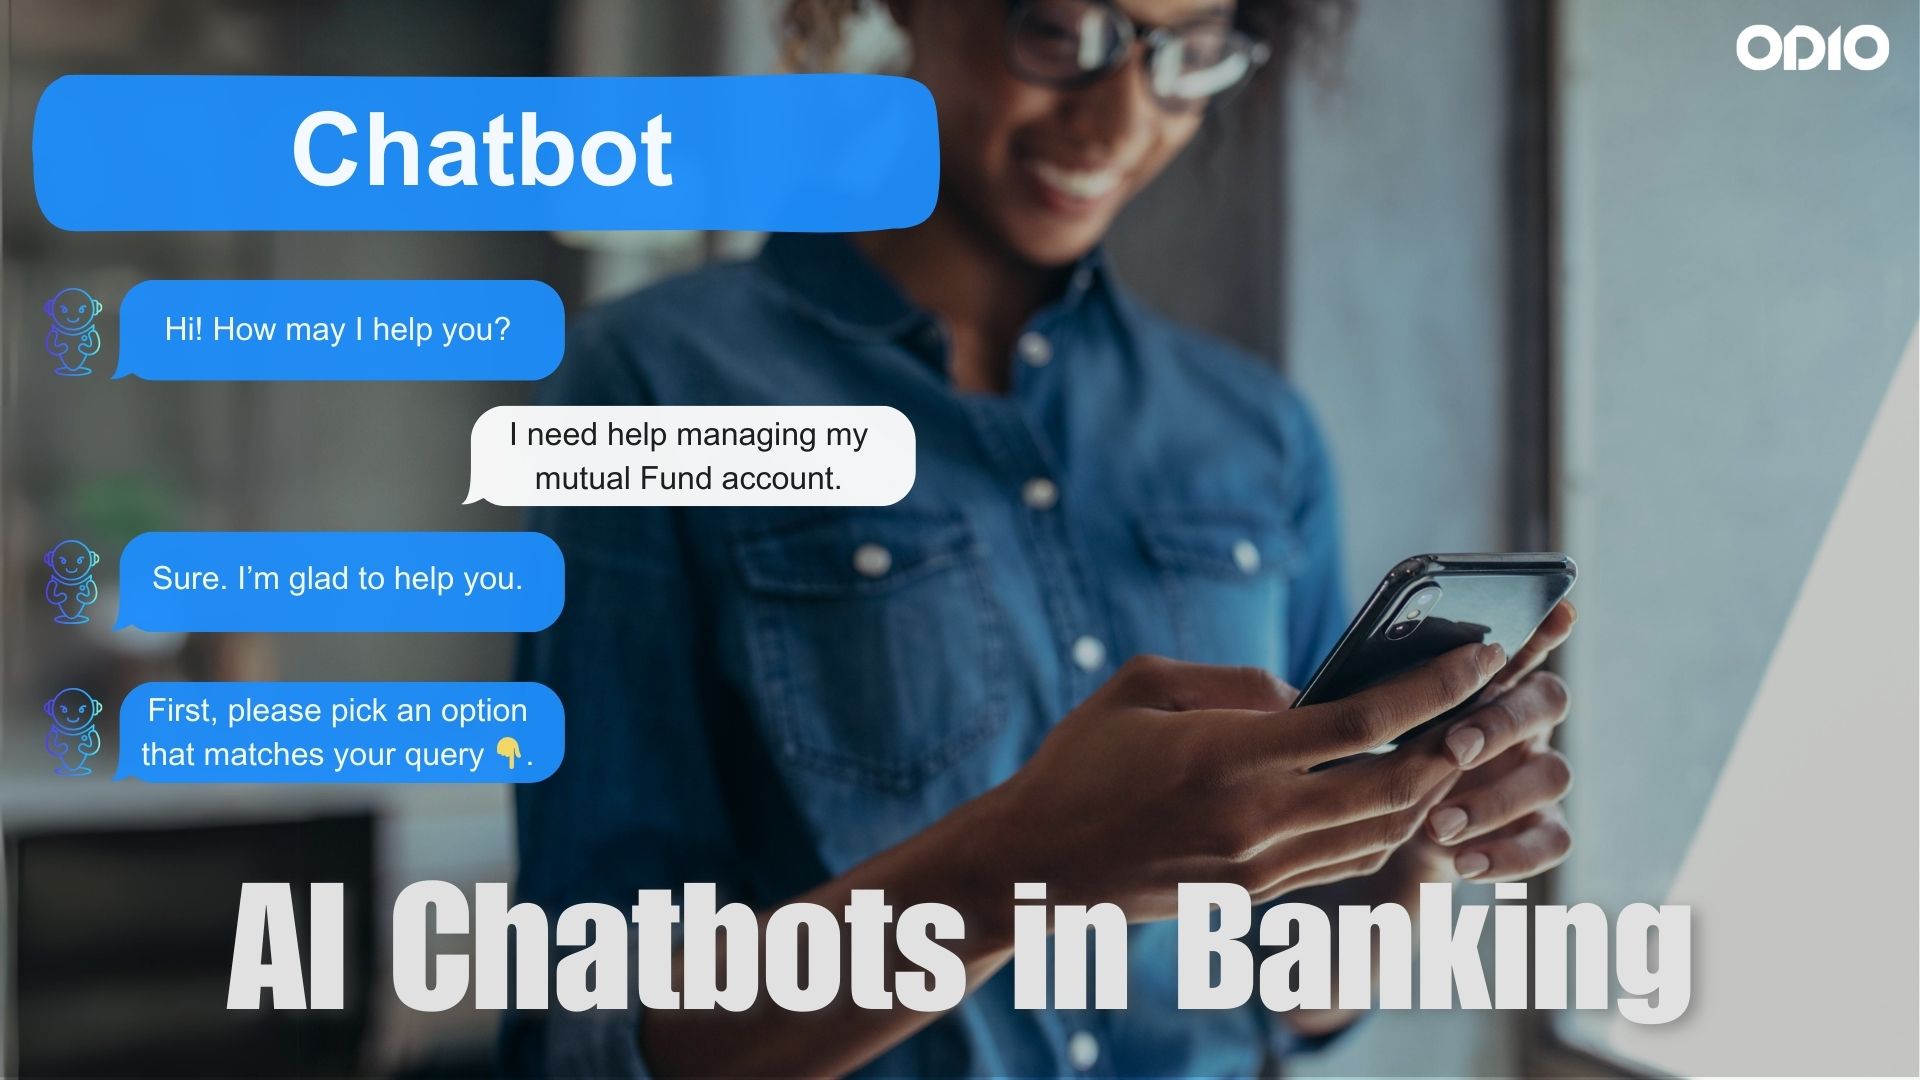 Image showing a female using her smartphone to chat with a Chatbots in Banking